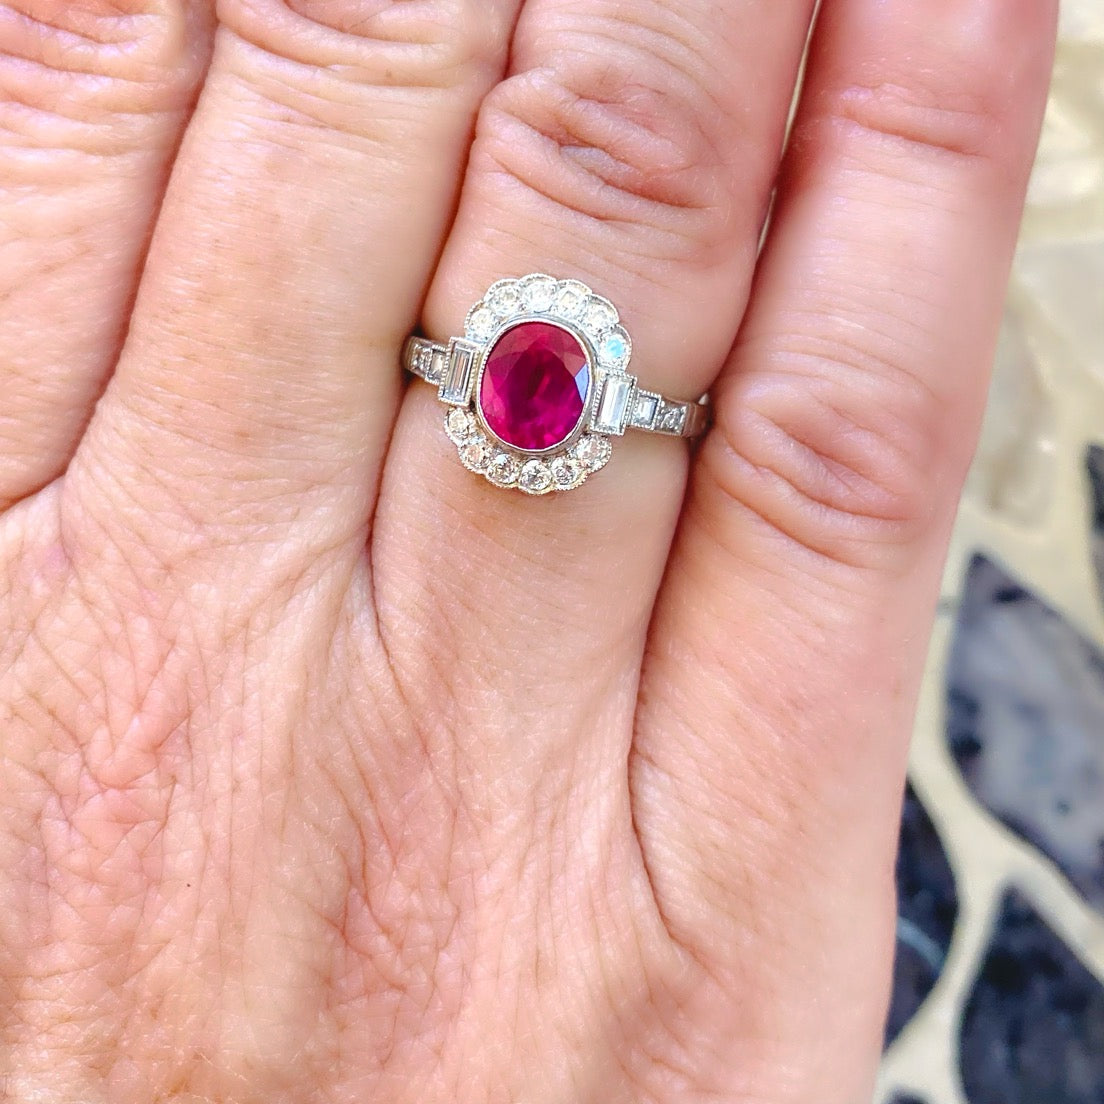 Kwiat | Engagement Ring with a Ruby Halo in Platinum in Platinum - Kwiat